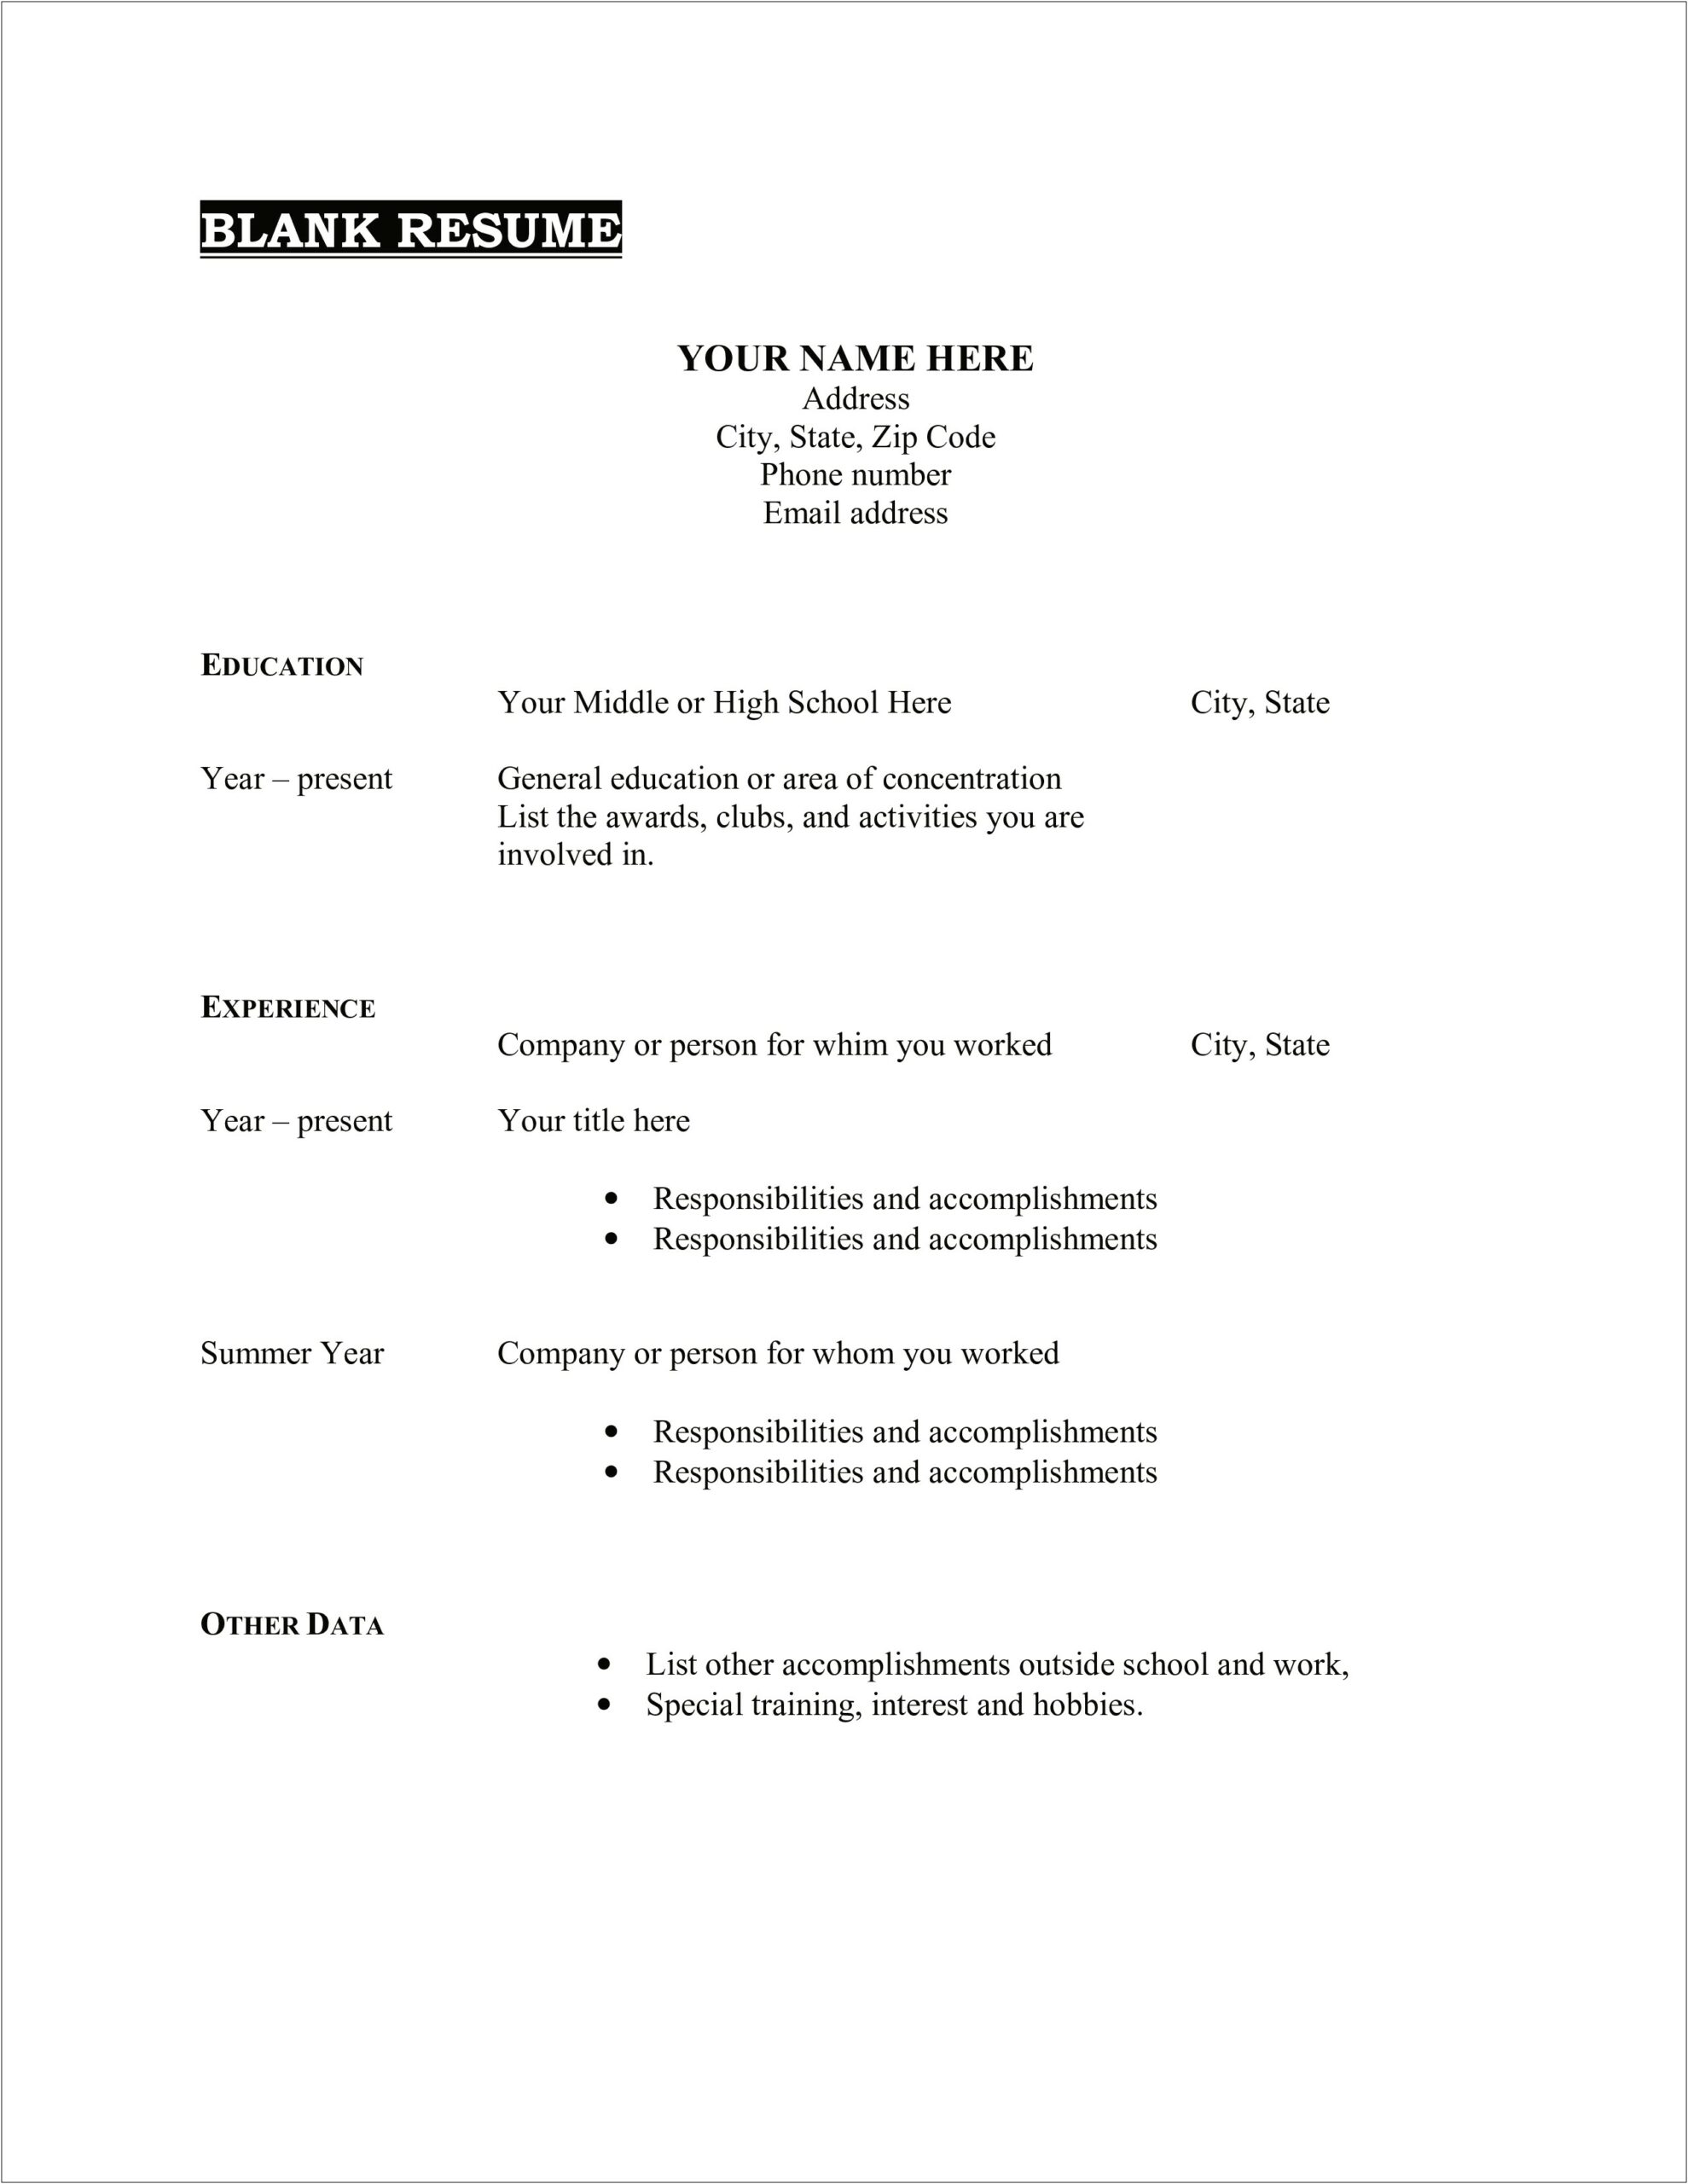 Resume Templates To Fill In The Blanks